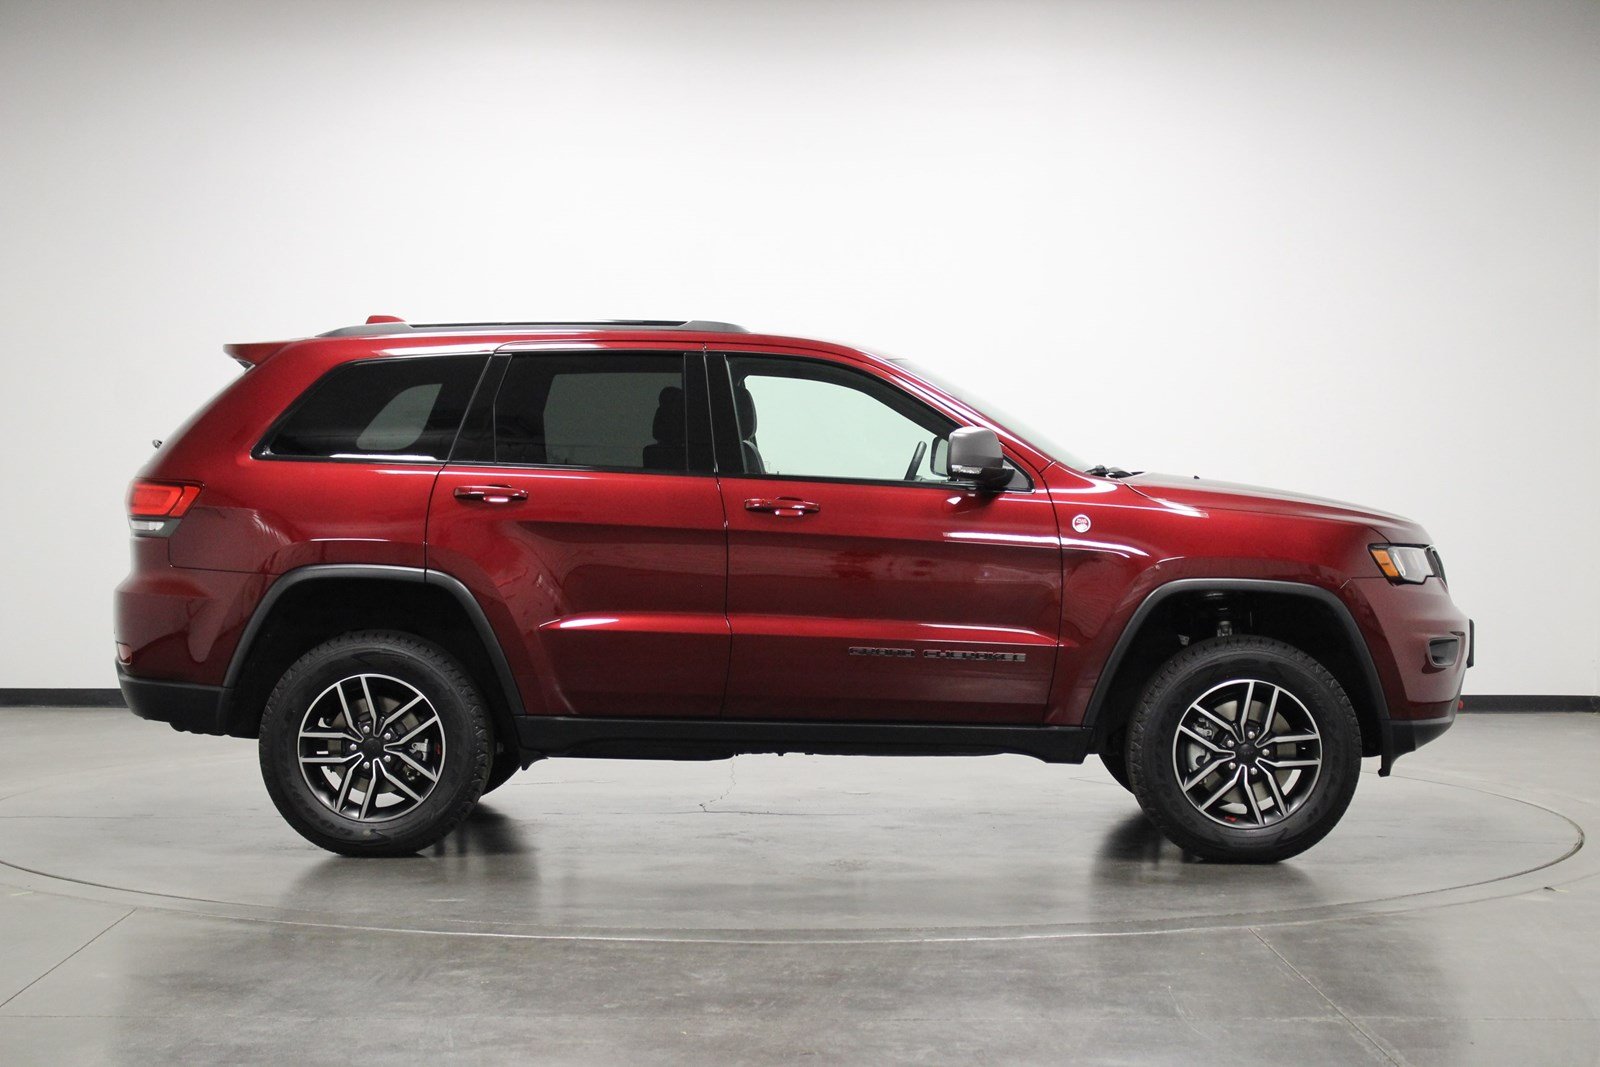 PreOwned 2019 Jeep Grand Cherokee Trailhawk Sport Utility